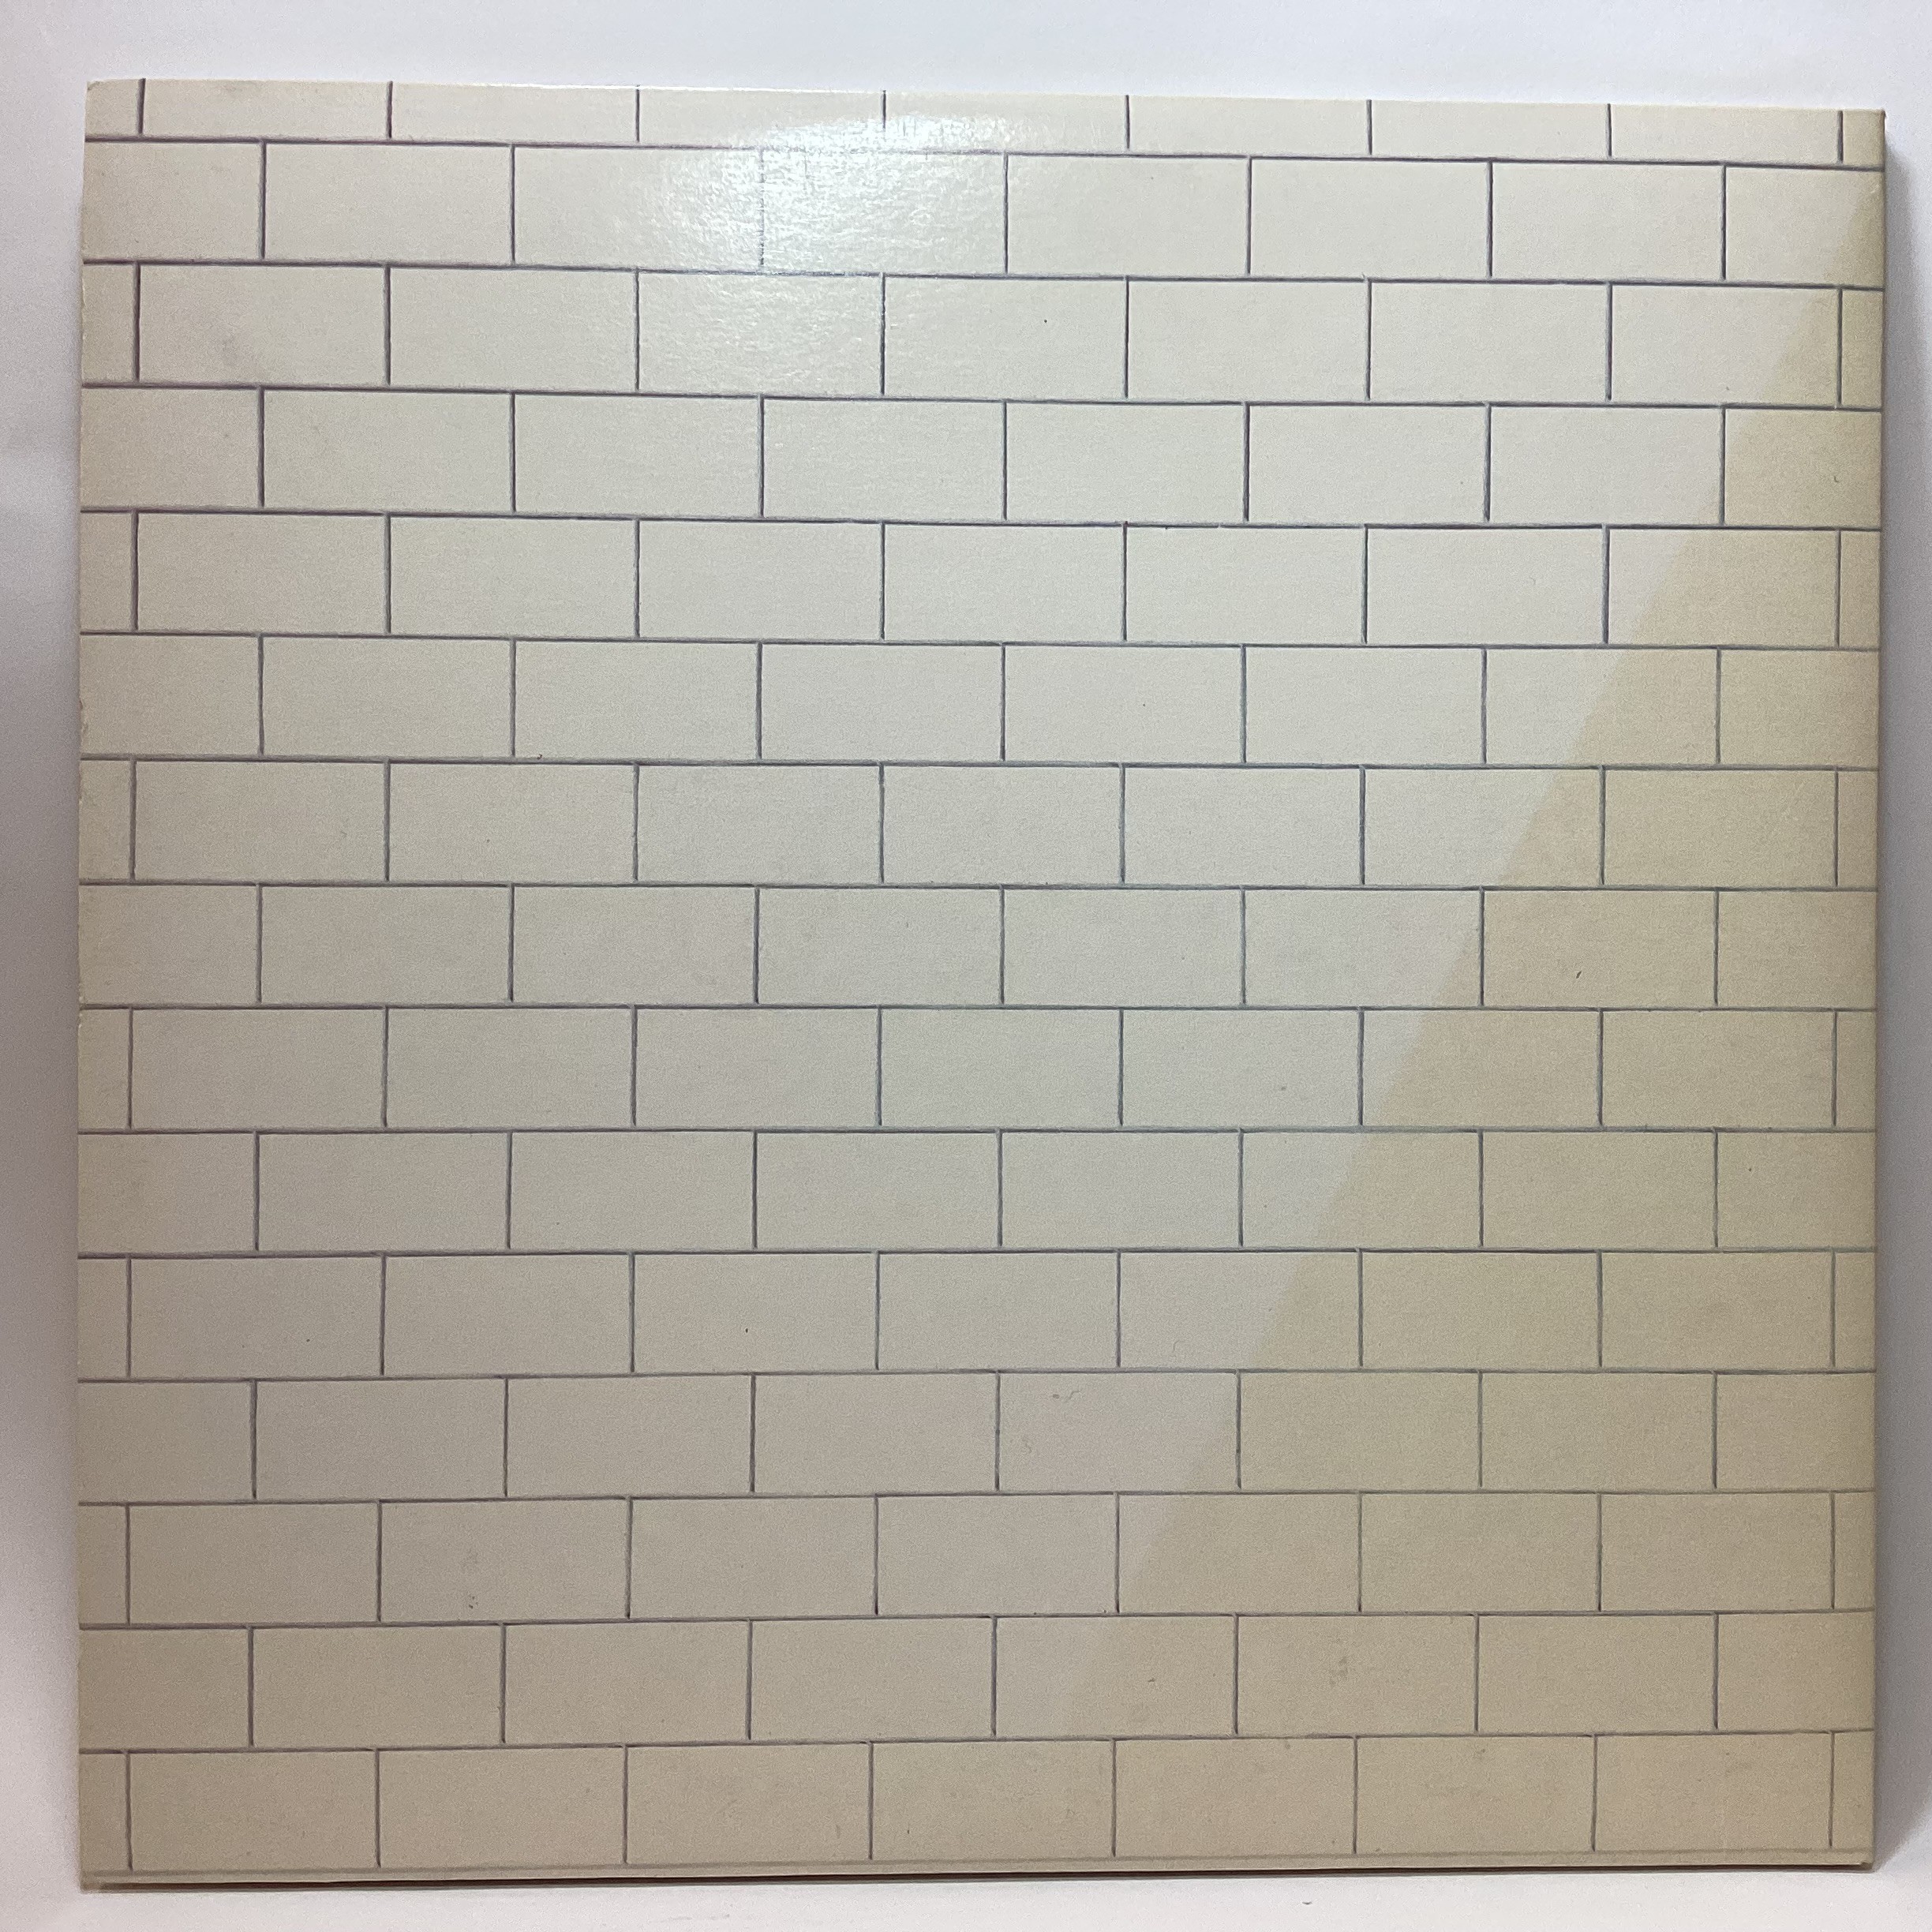 PINK FLOYD ‘THE WALL’ DOUBLE LP RECORD. Released in 1979, "The Wall" stands as one of Pink Floyd's - Image 3 of 6